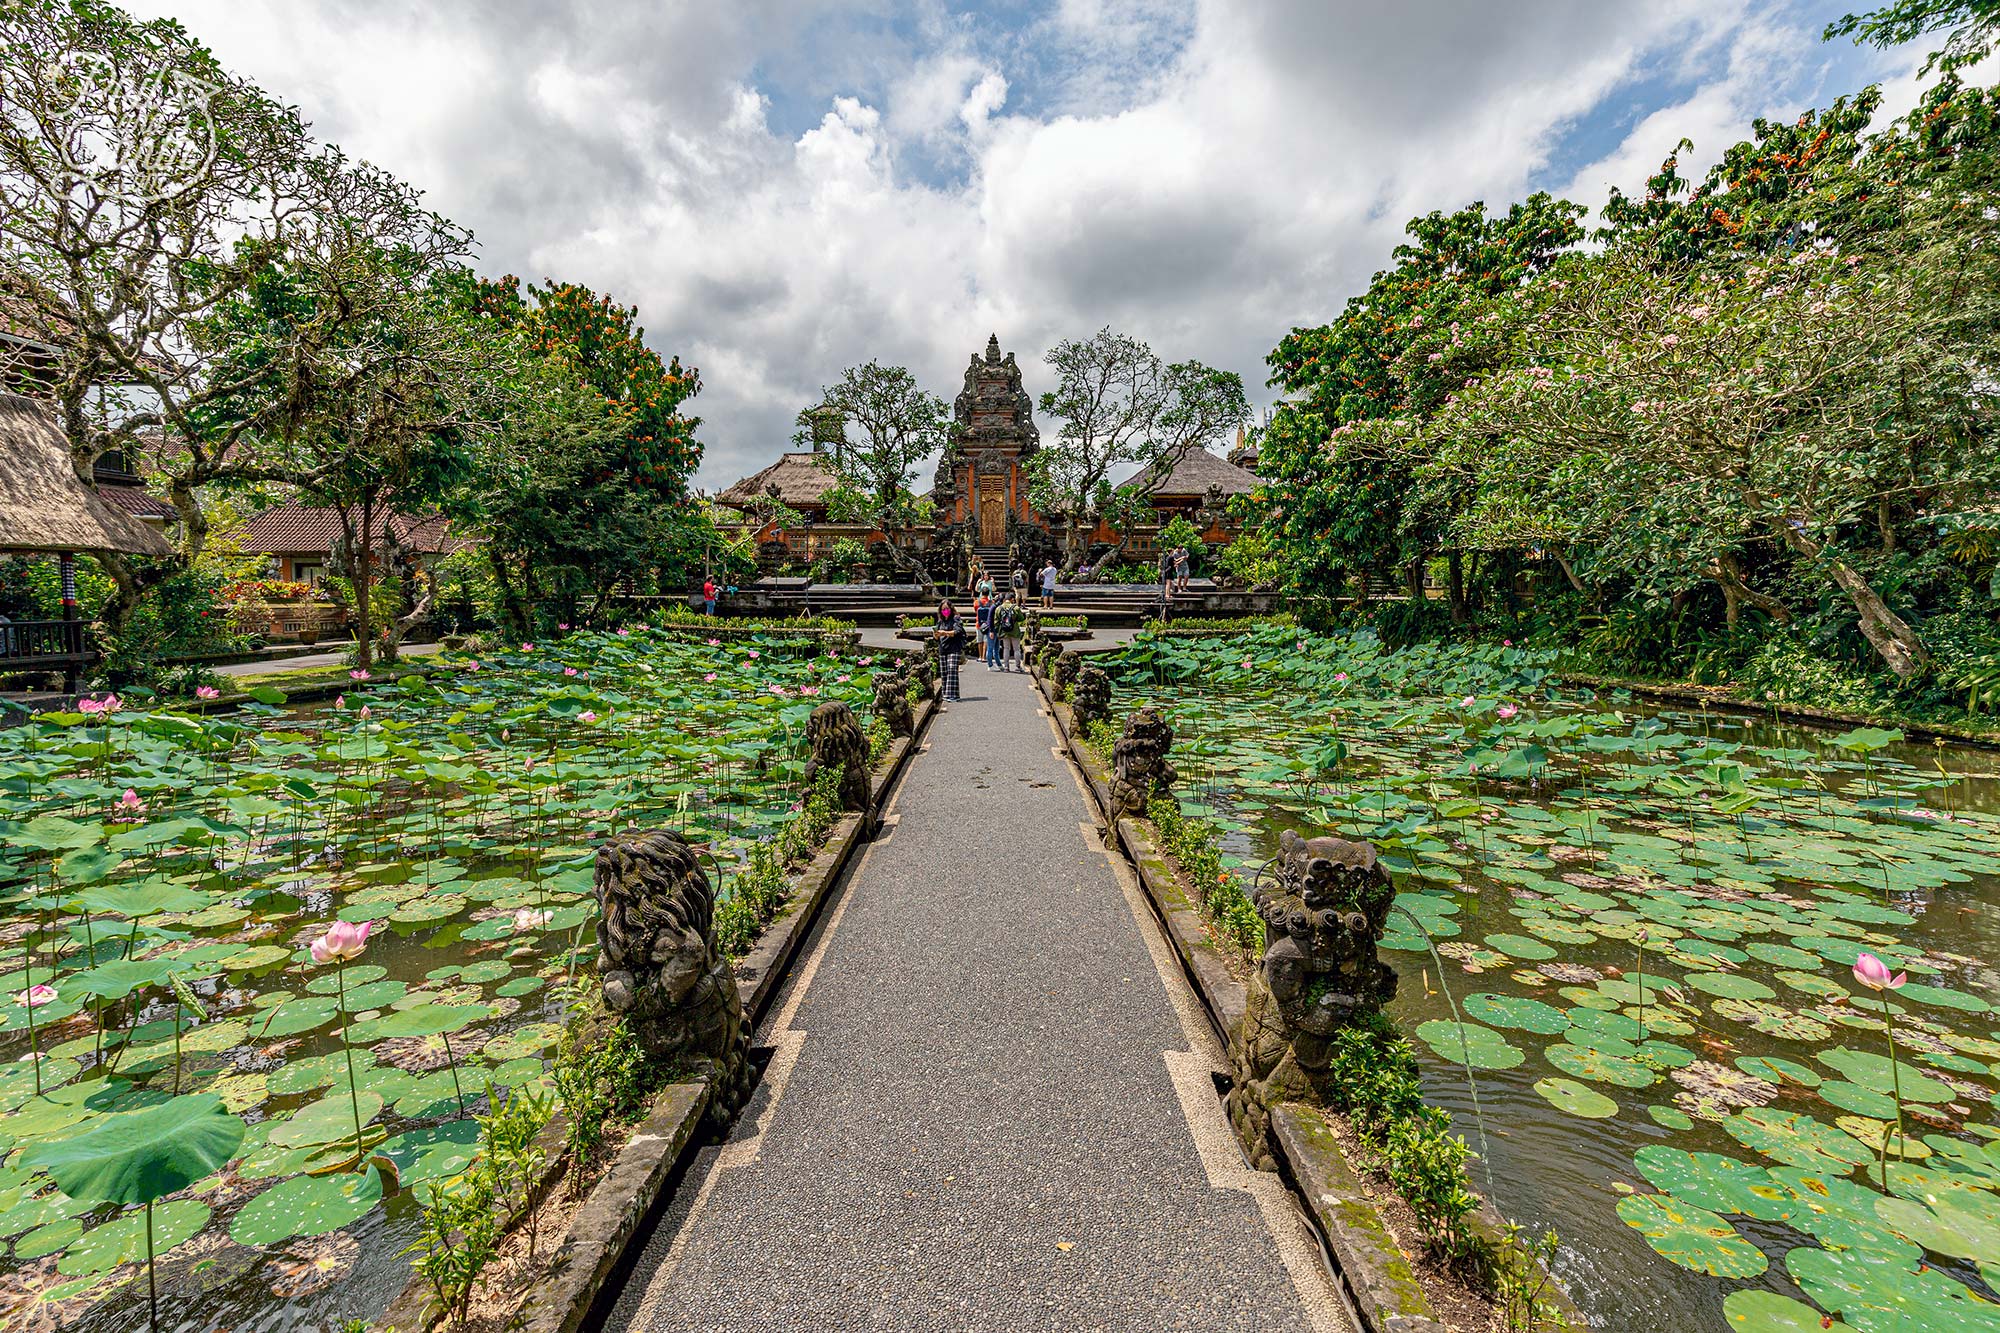 The main feature of the garden is the magnificent lotus filled pond